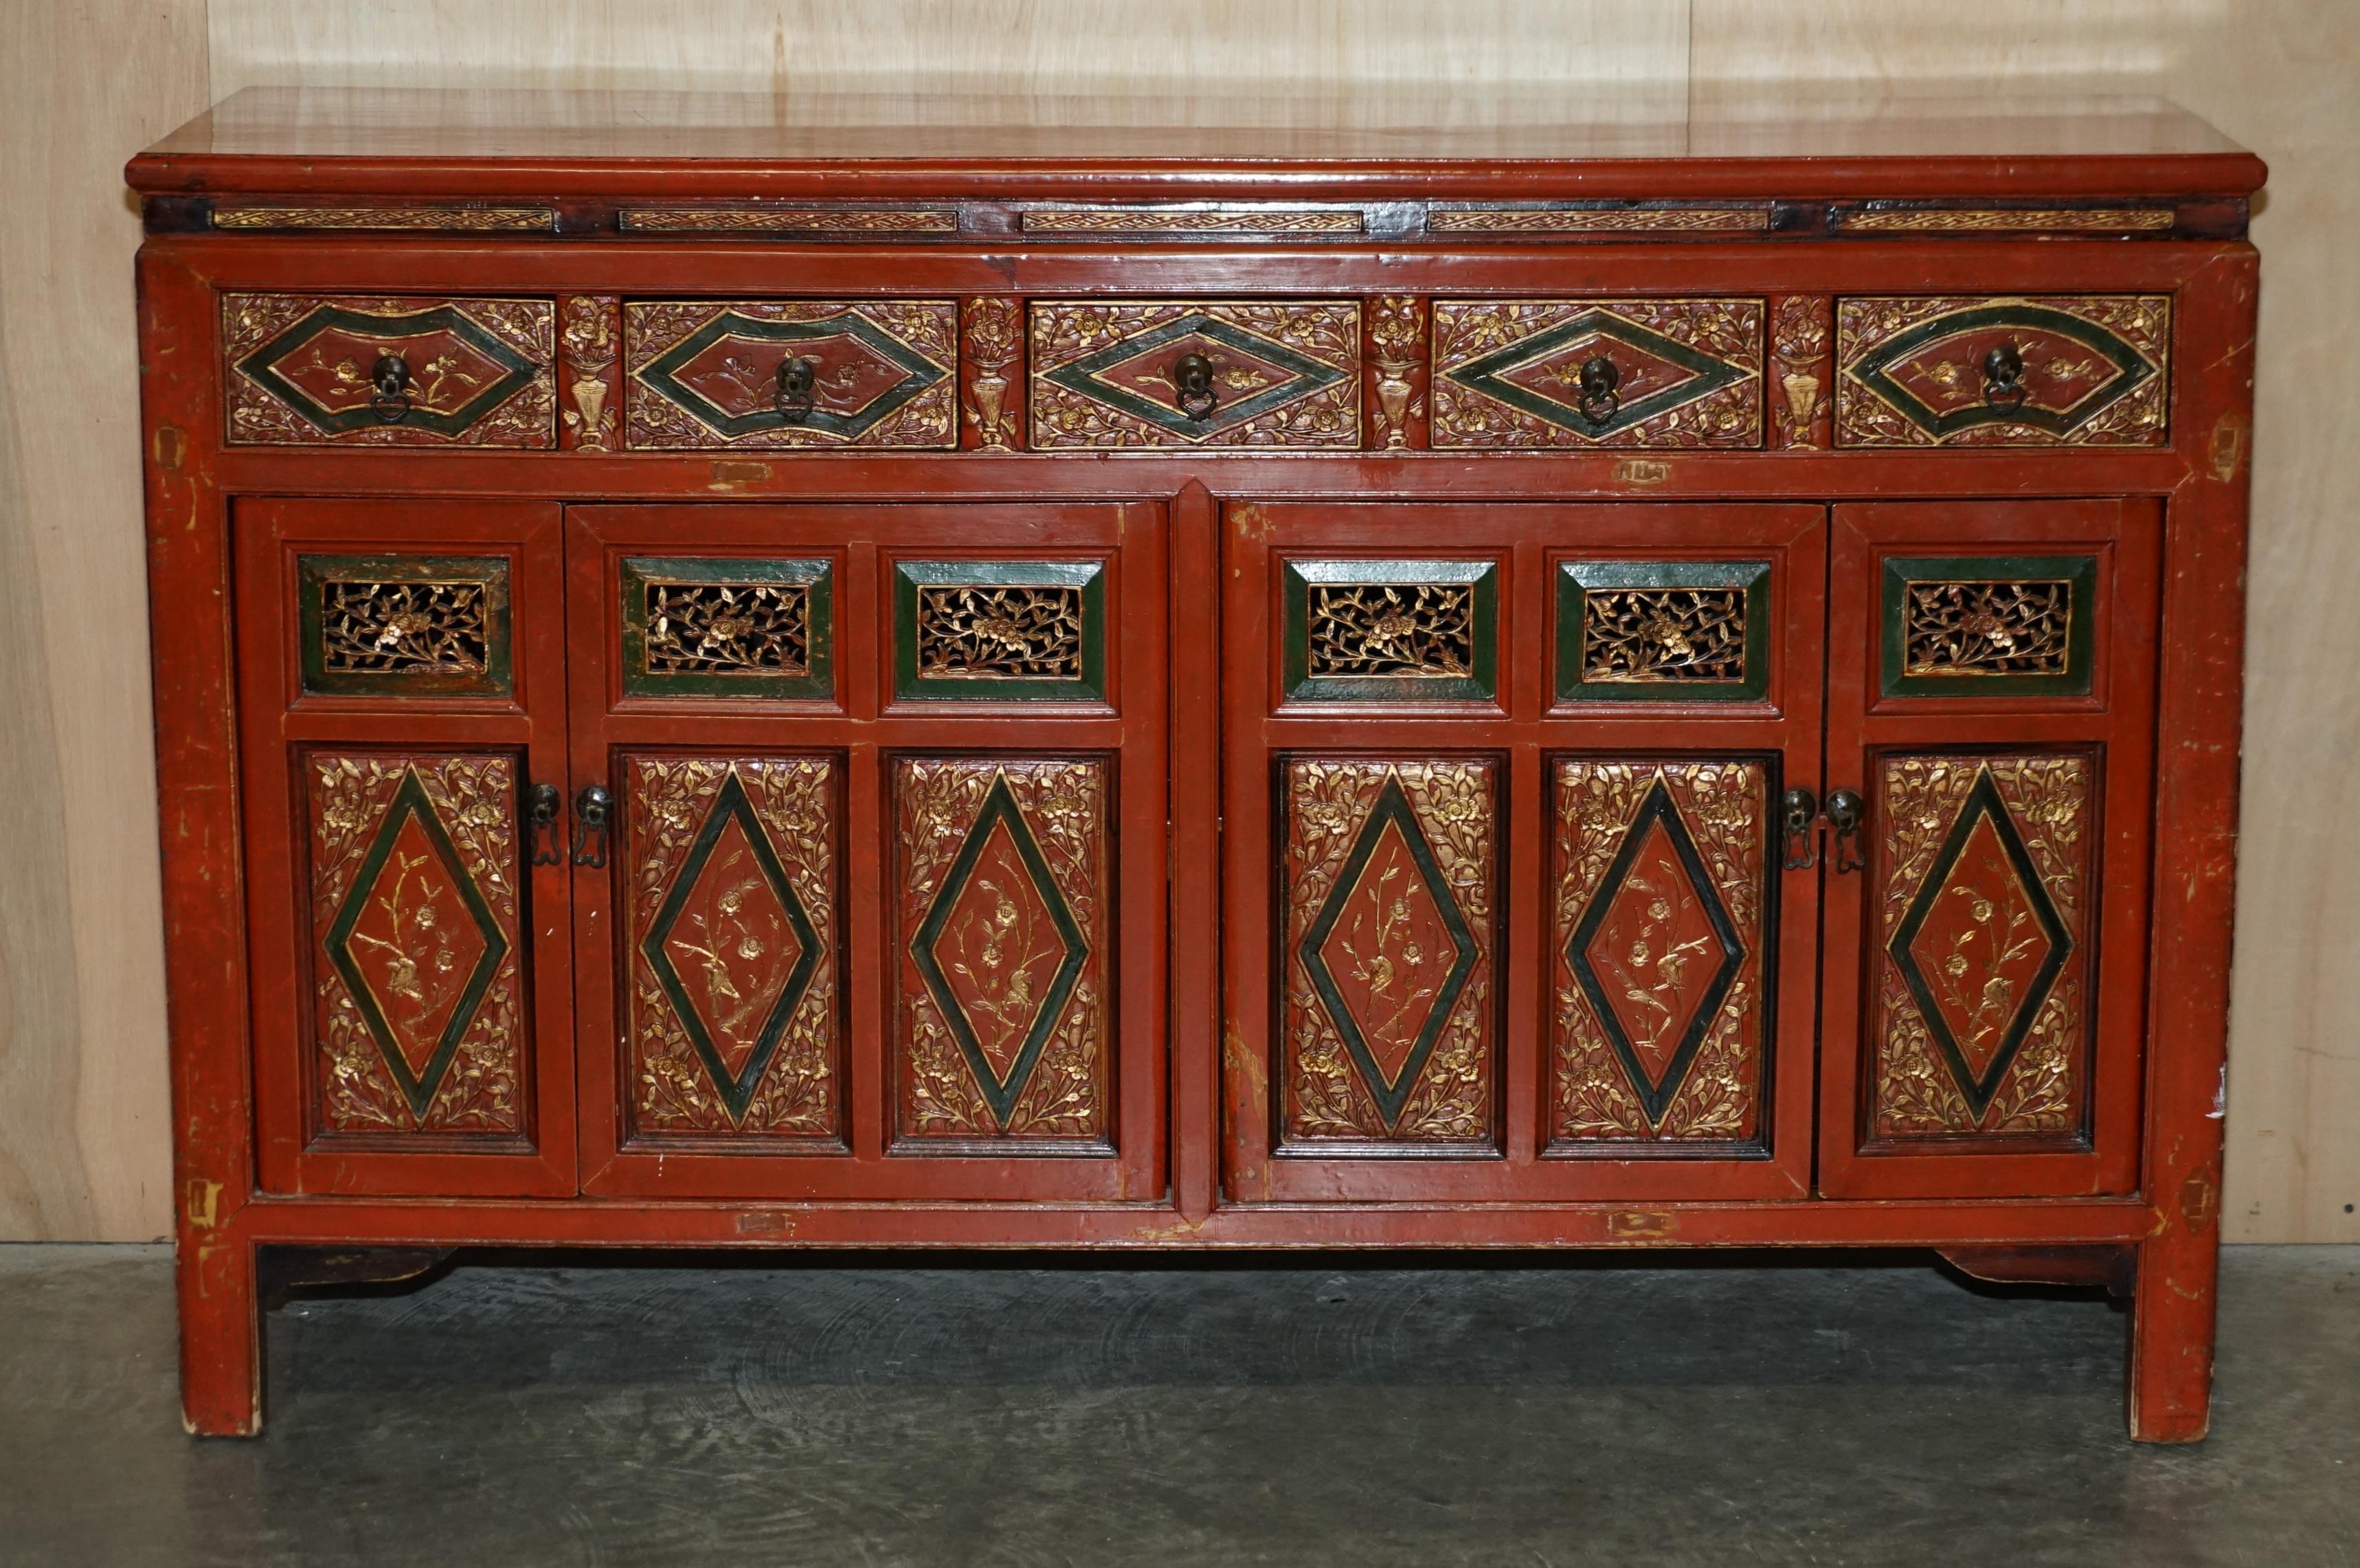 We are delighted to offer for sale this very nicely made, Chinese floral gold leaf painted and lacquered sideboard cupboard

This is a very good-looking and decorative piece, it offers a great deal of cupboard storage and sits well in any setting.